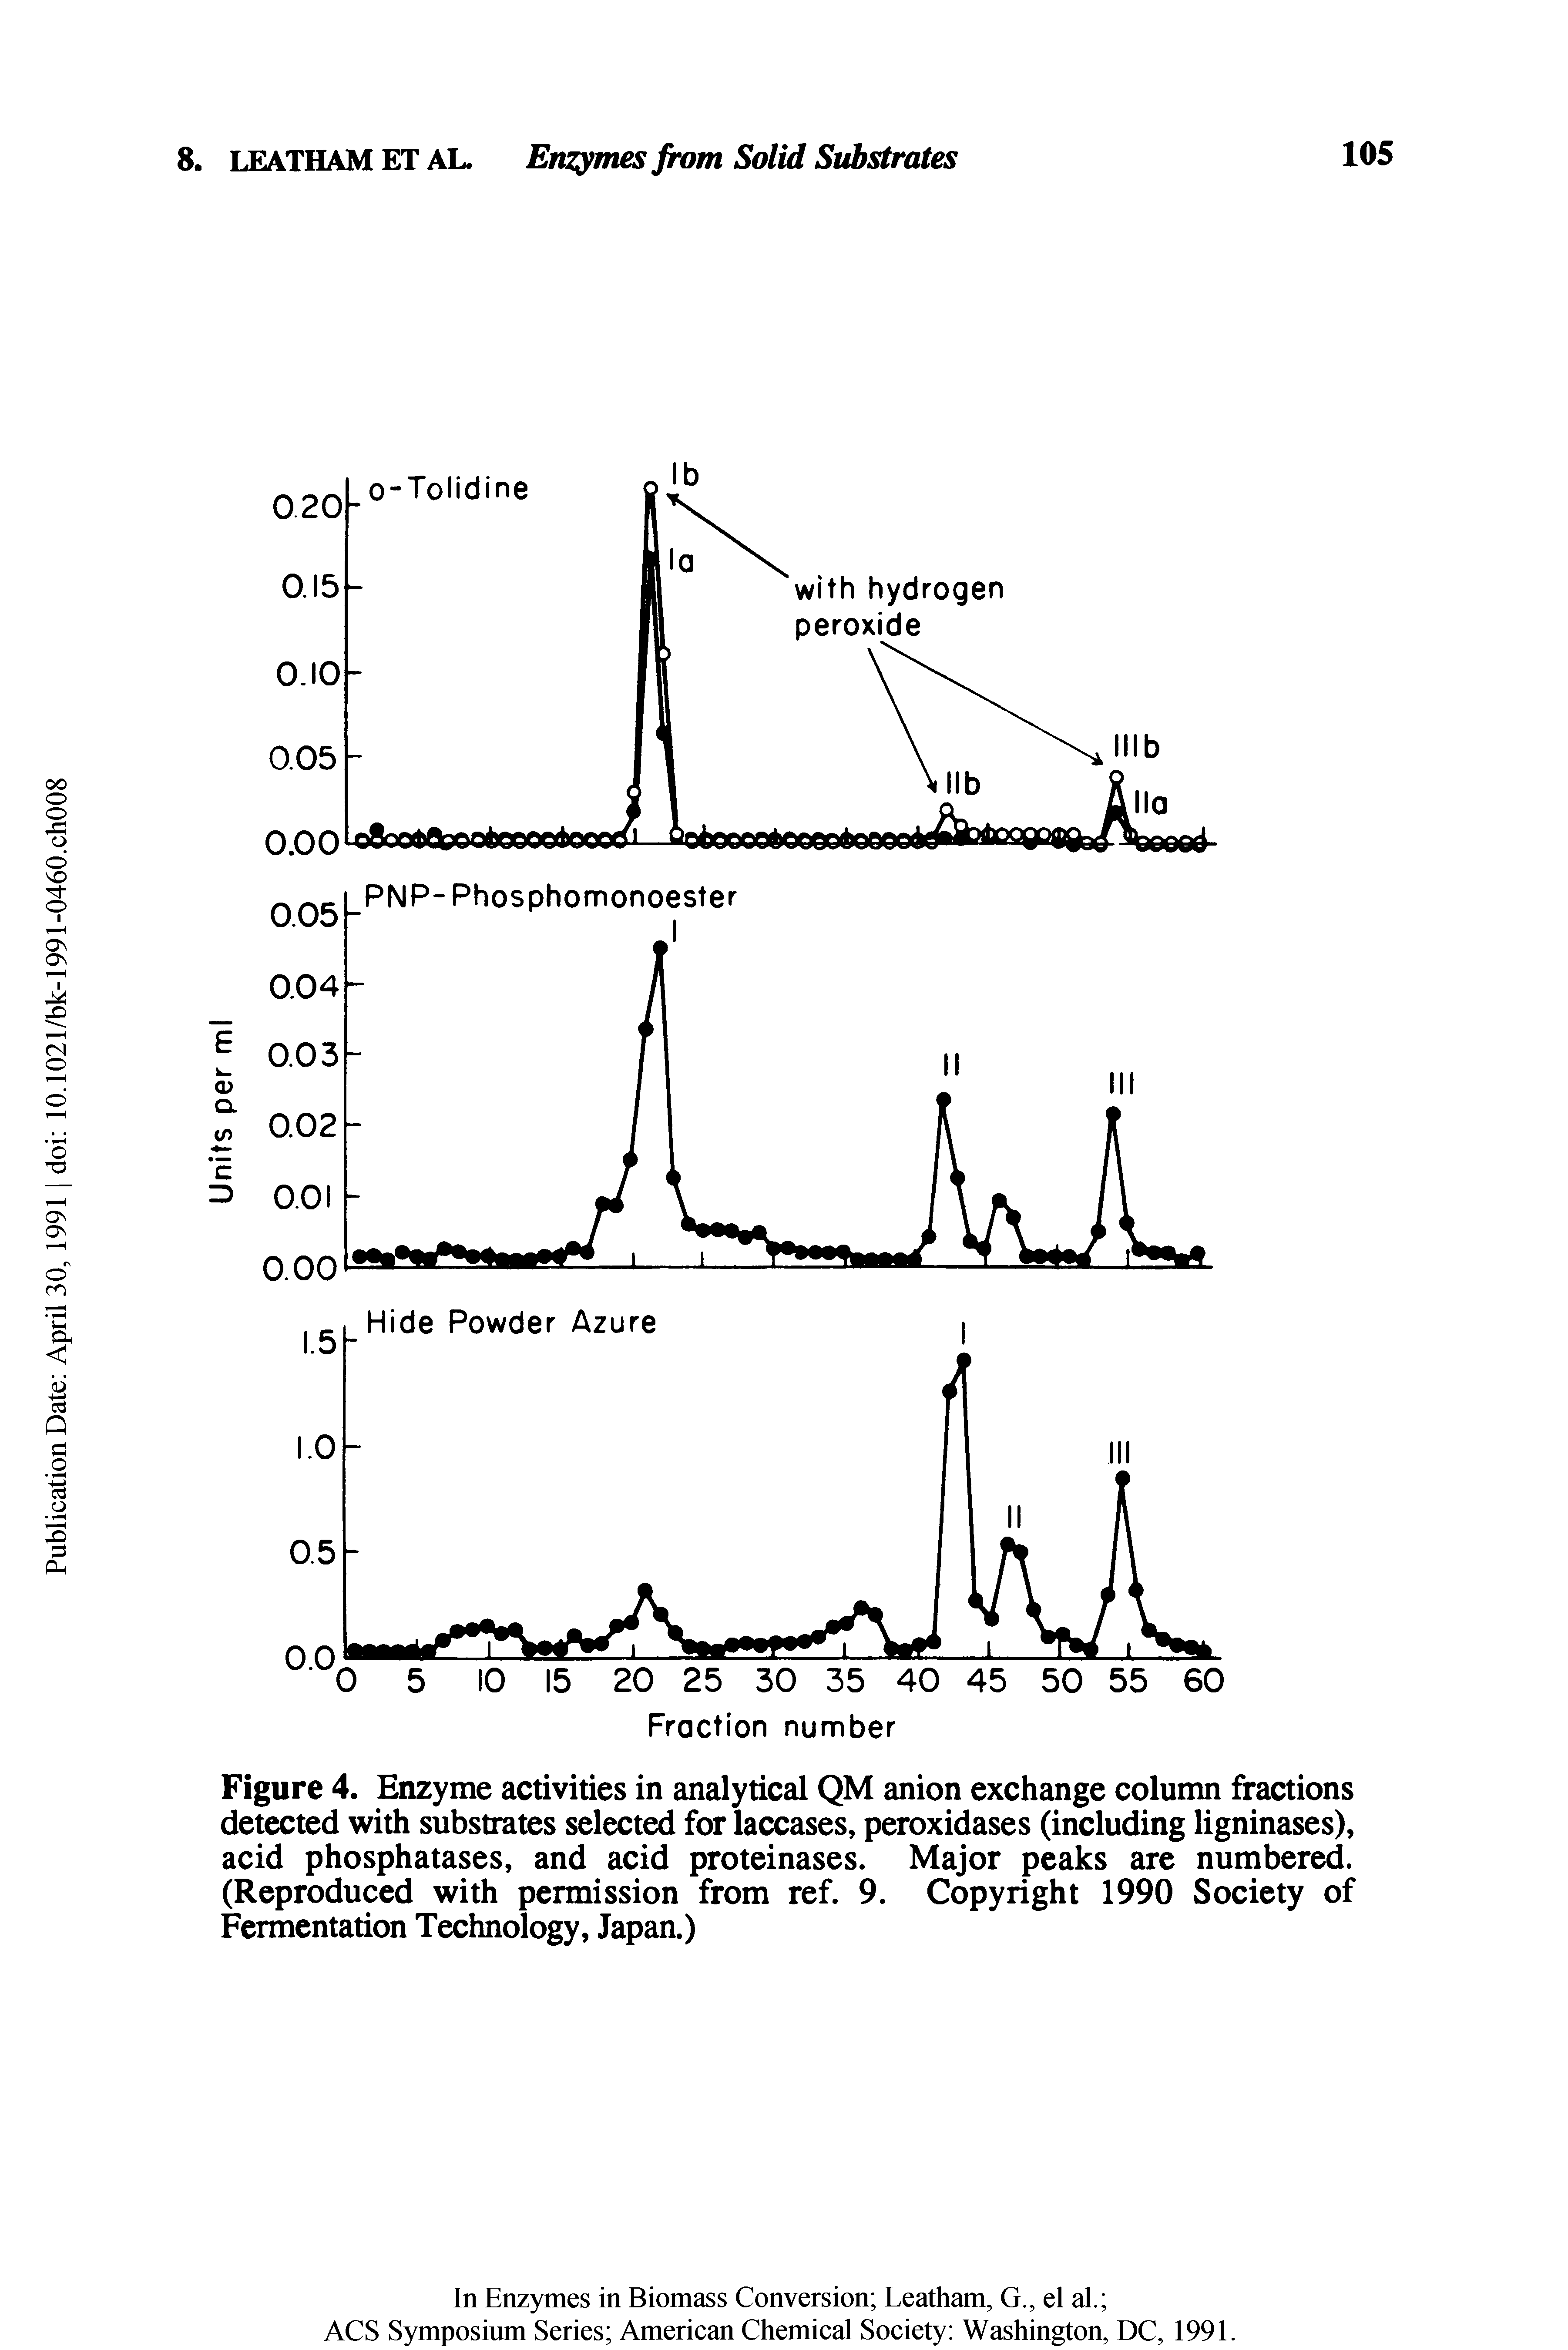 Figure 4. Enzyme activities in analytical QM anion exchange column fractions detected with substrates selected for laccases, peroxidases (including ligninases), acid phosphatases, and acid proteinases. Major peaks are numbered. (Reproduced with permission from ref. 9. Copyright 1990 Society of Fermentation Technology, Japan.)...